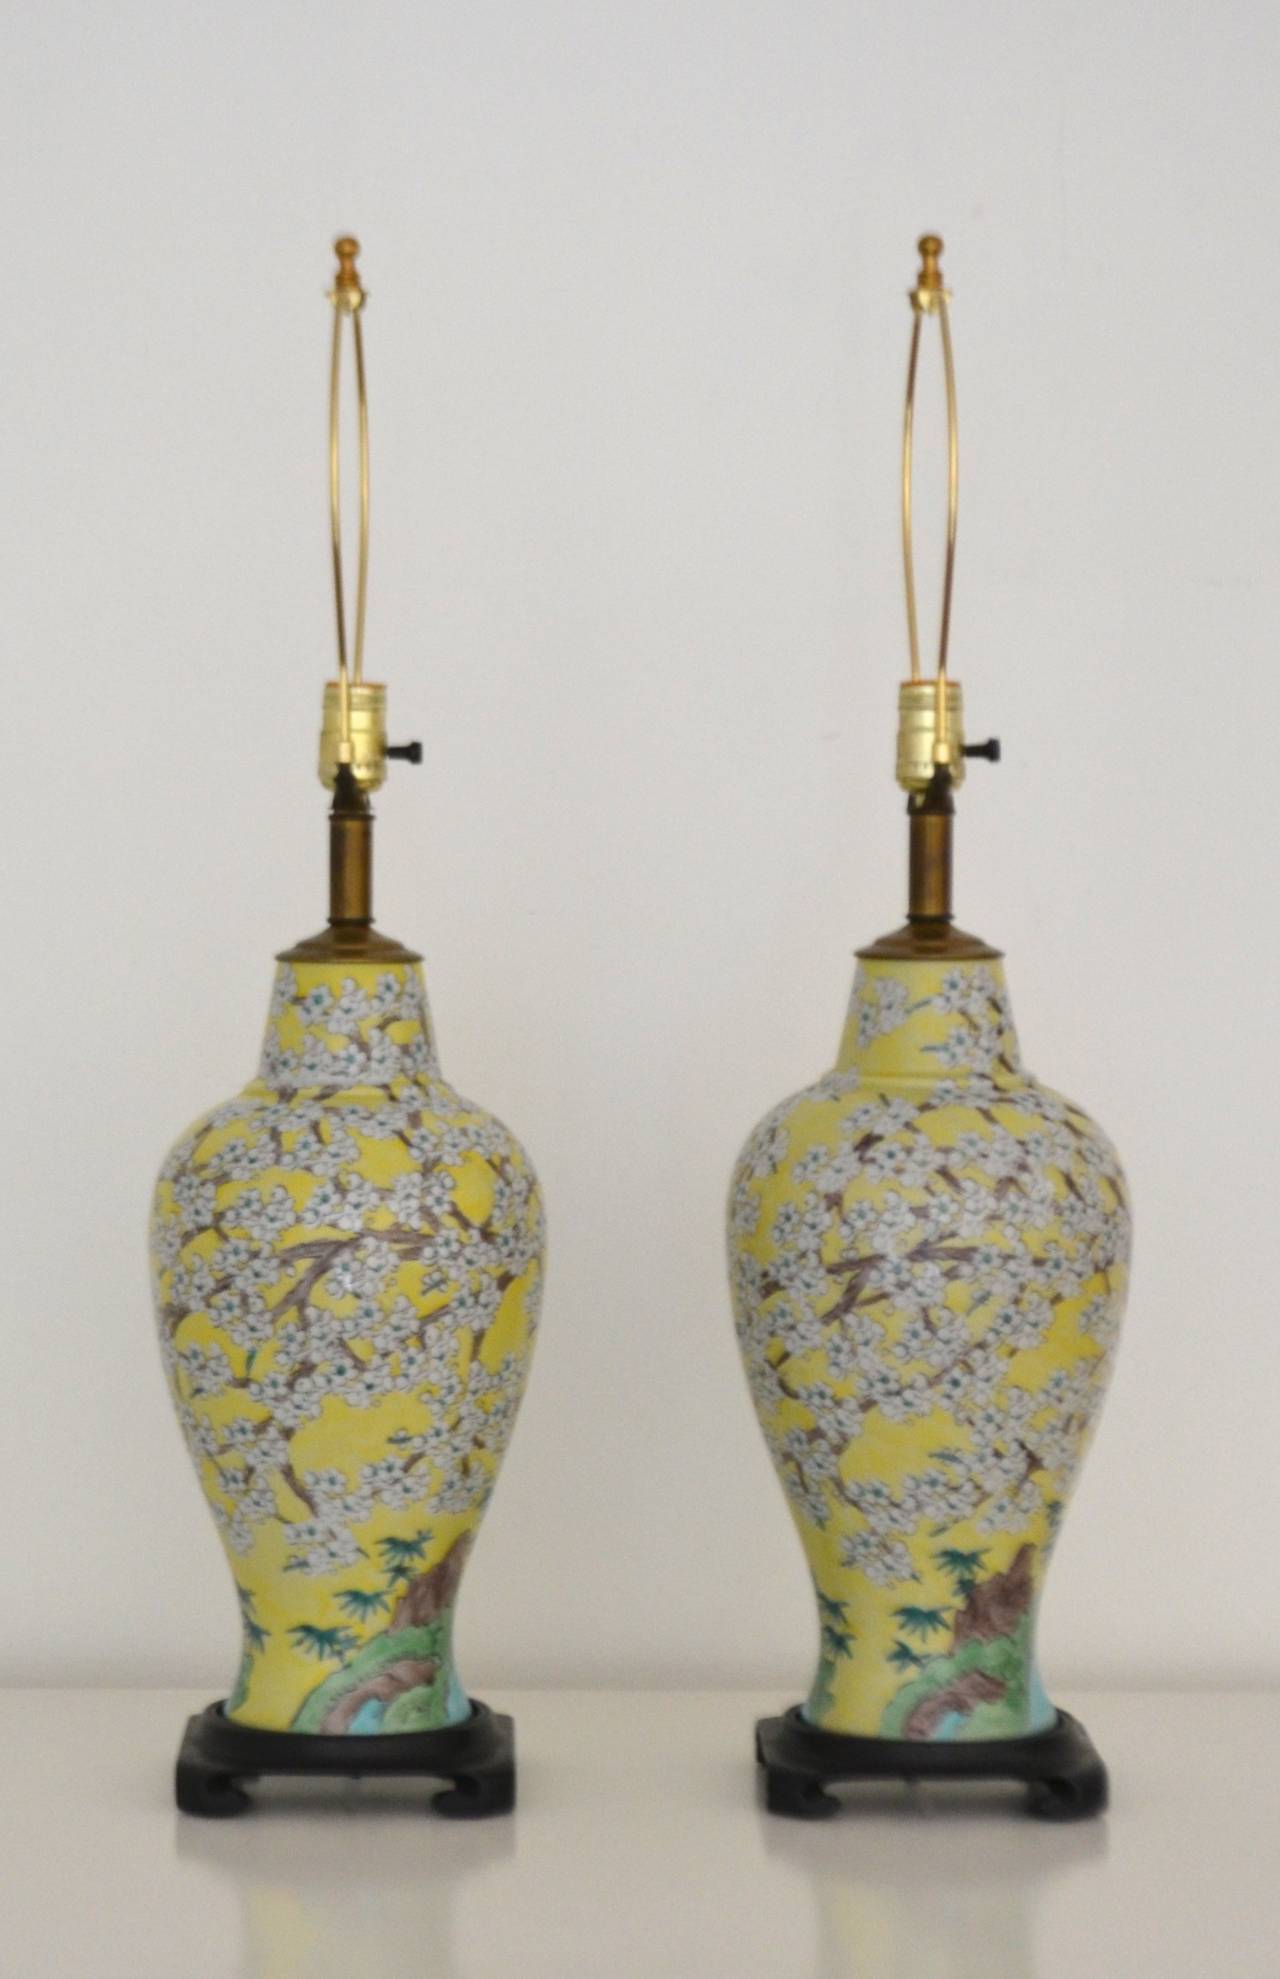 Pair of Asian Inspired Polychrome Porcelain Table Lamps (Mitte des 20. Jahrhunderts) im Angebot